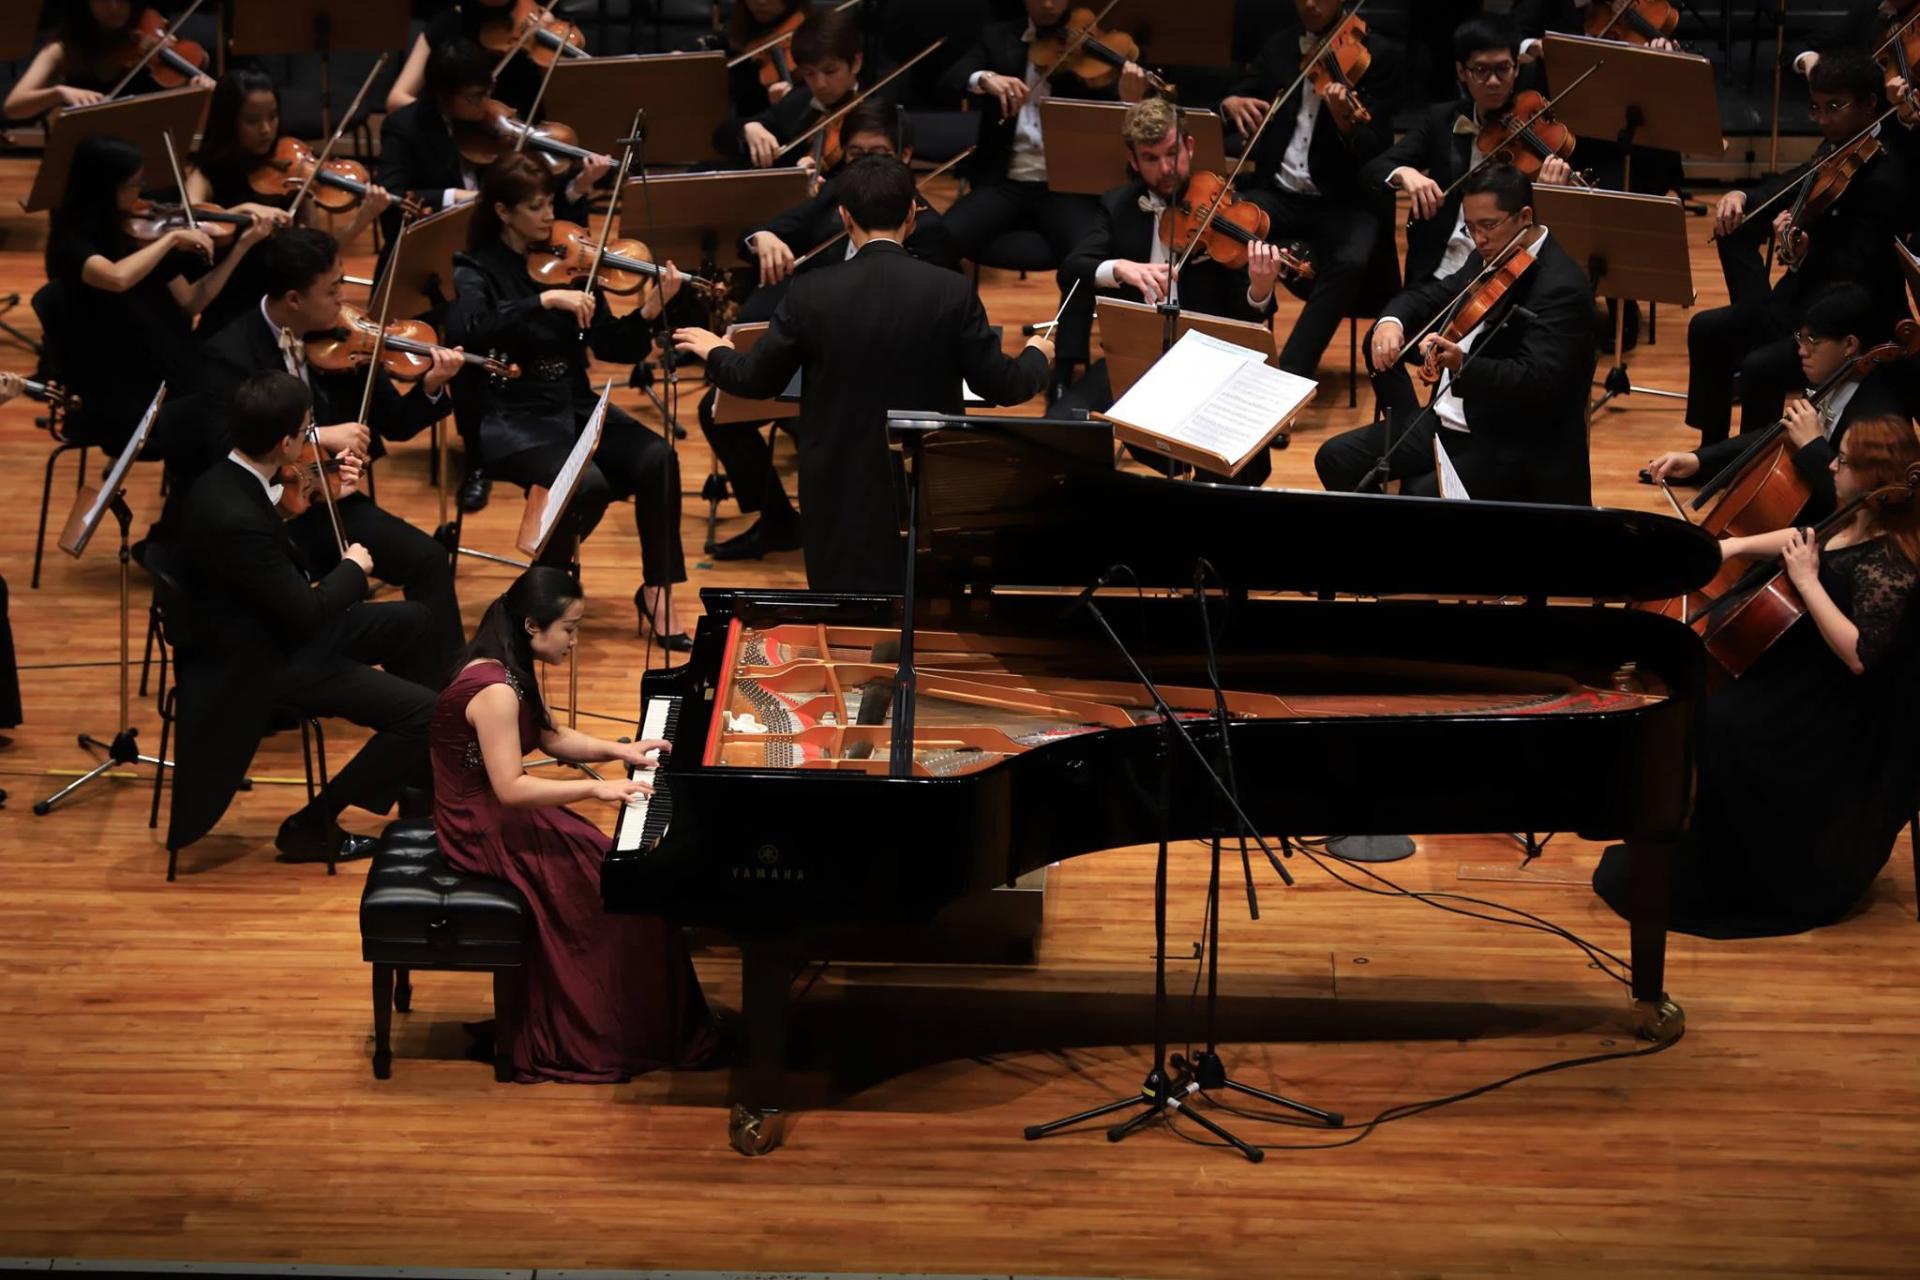 Xu Guo Performing on the Piano on stage at a competition